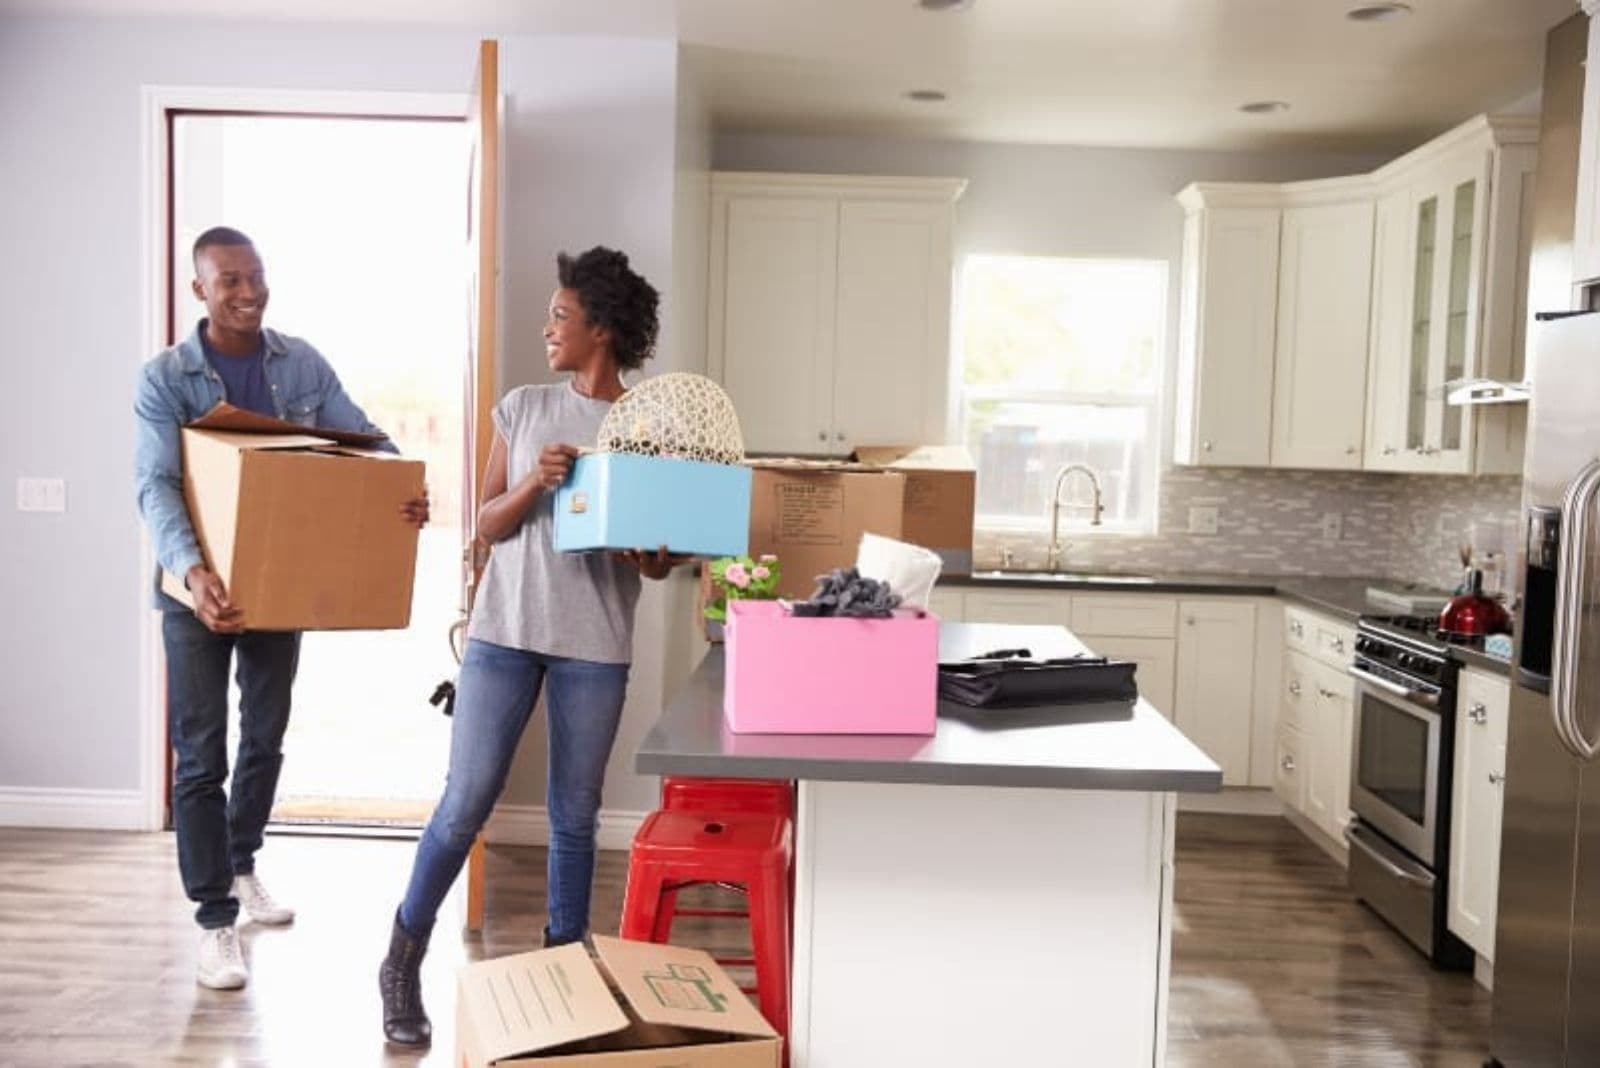 a smiling black man and woman bring things into the house